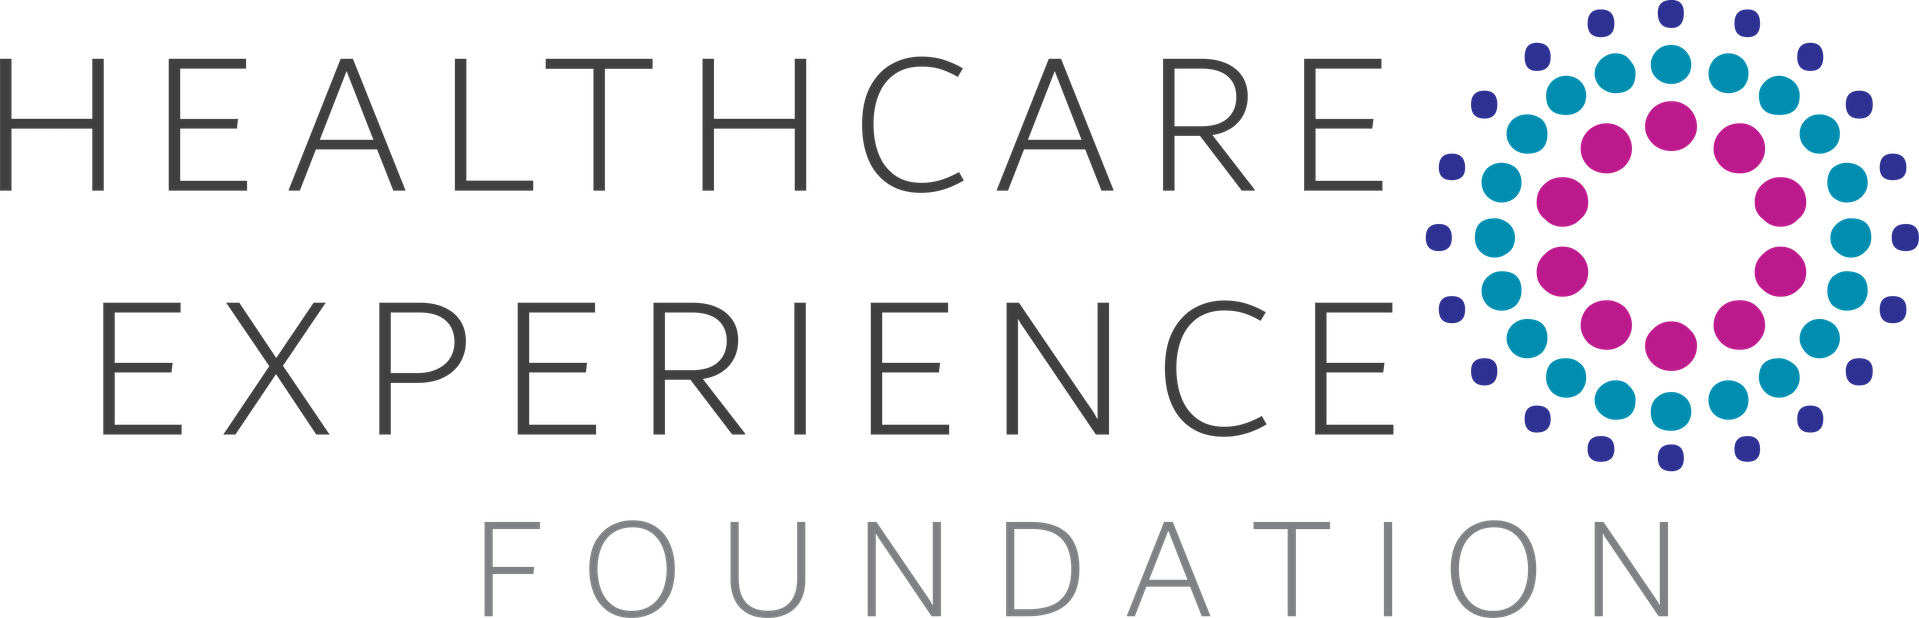 Healthcare Experience Foundation